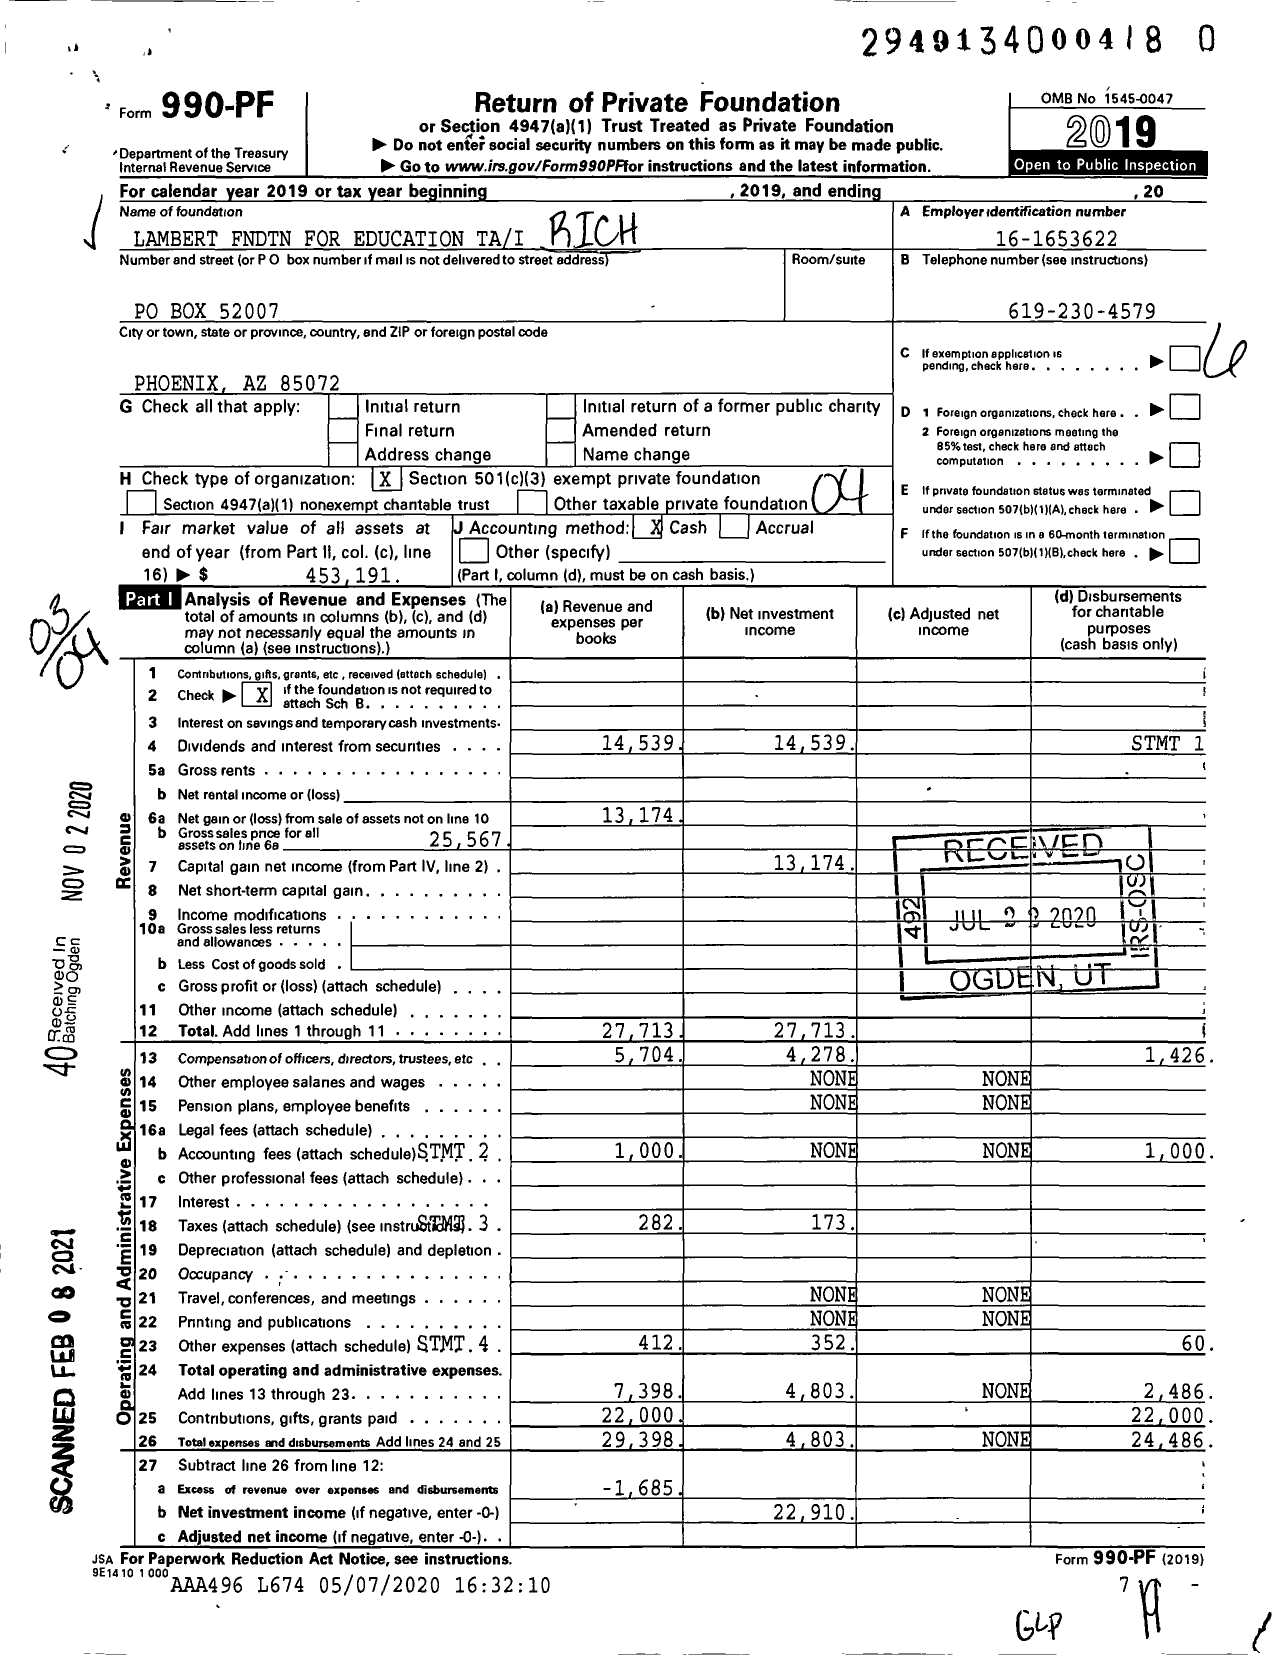 Image of first page of 2019 Form 990PF for Lambert Fndtn for Education Tai